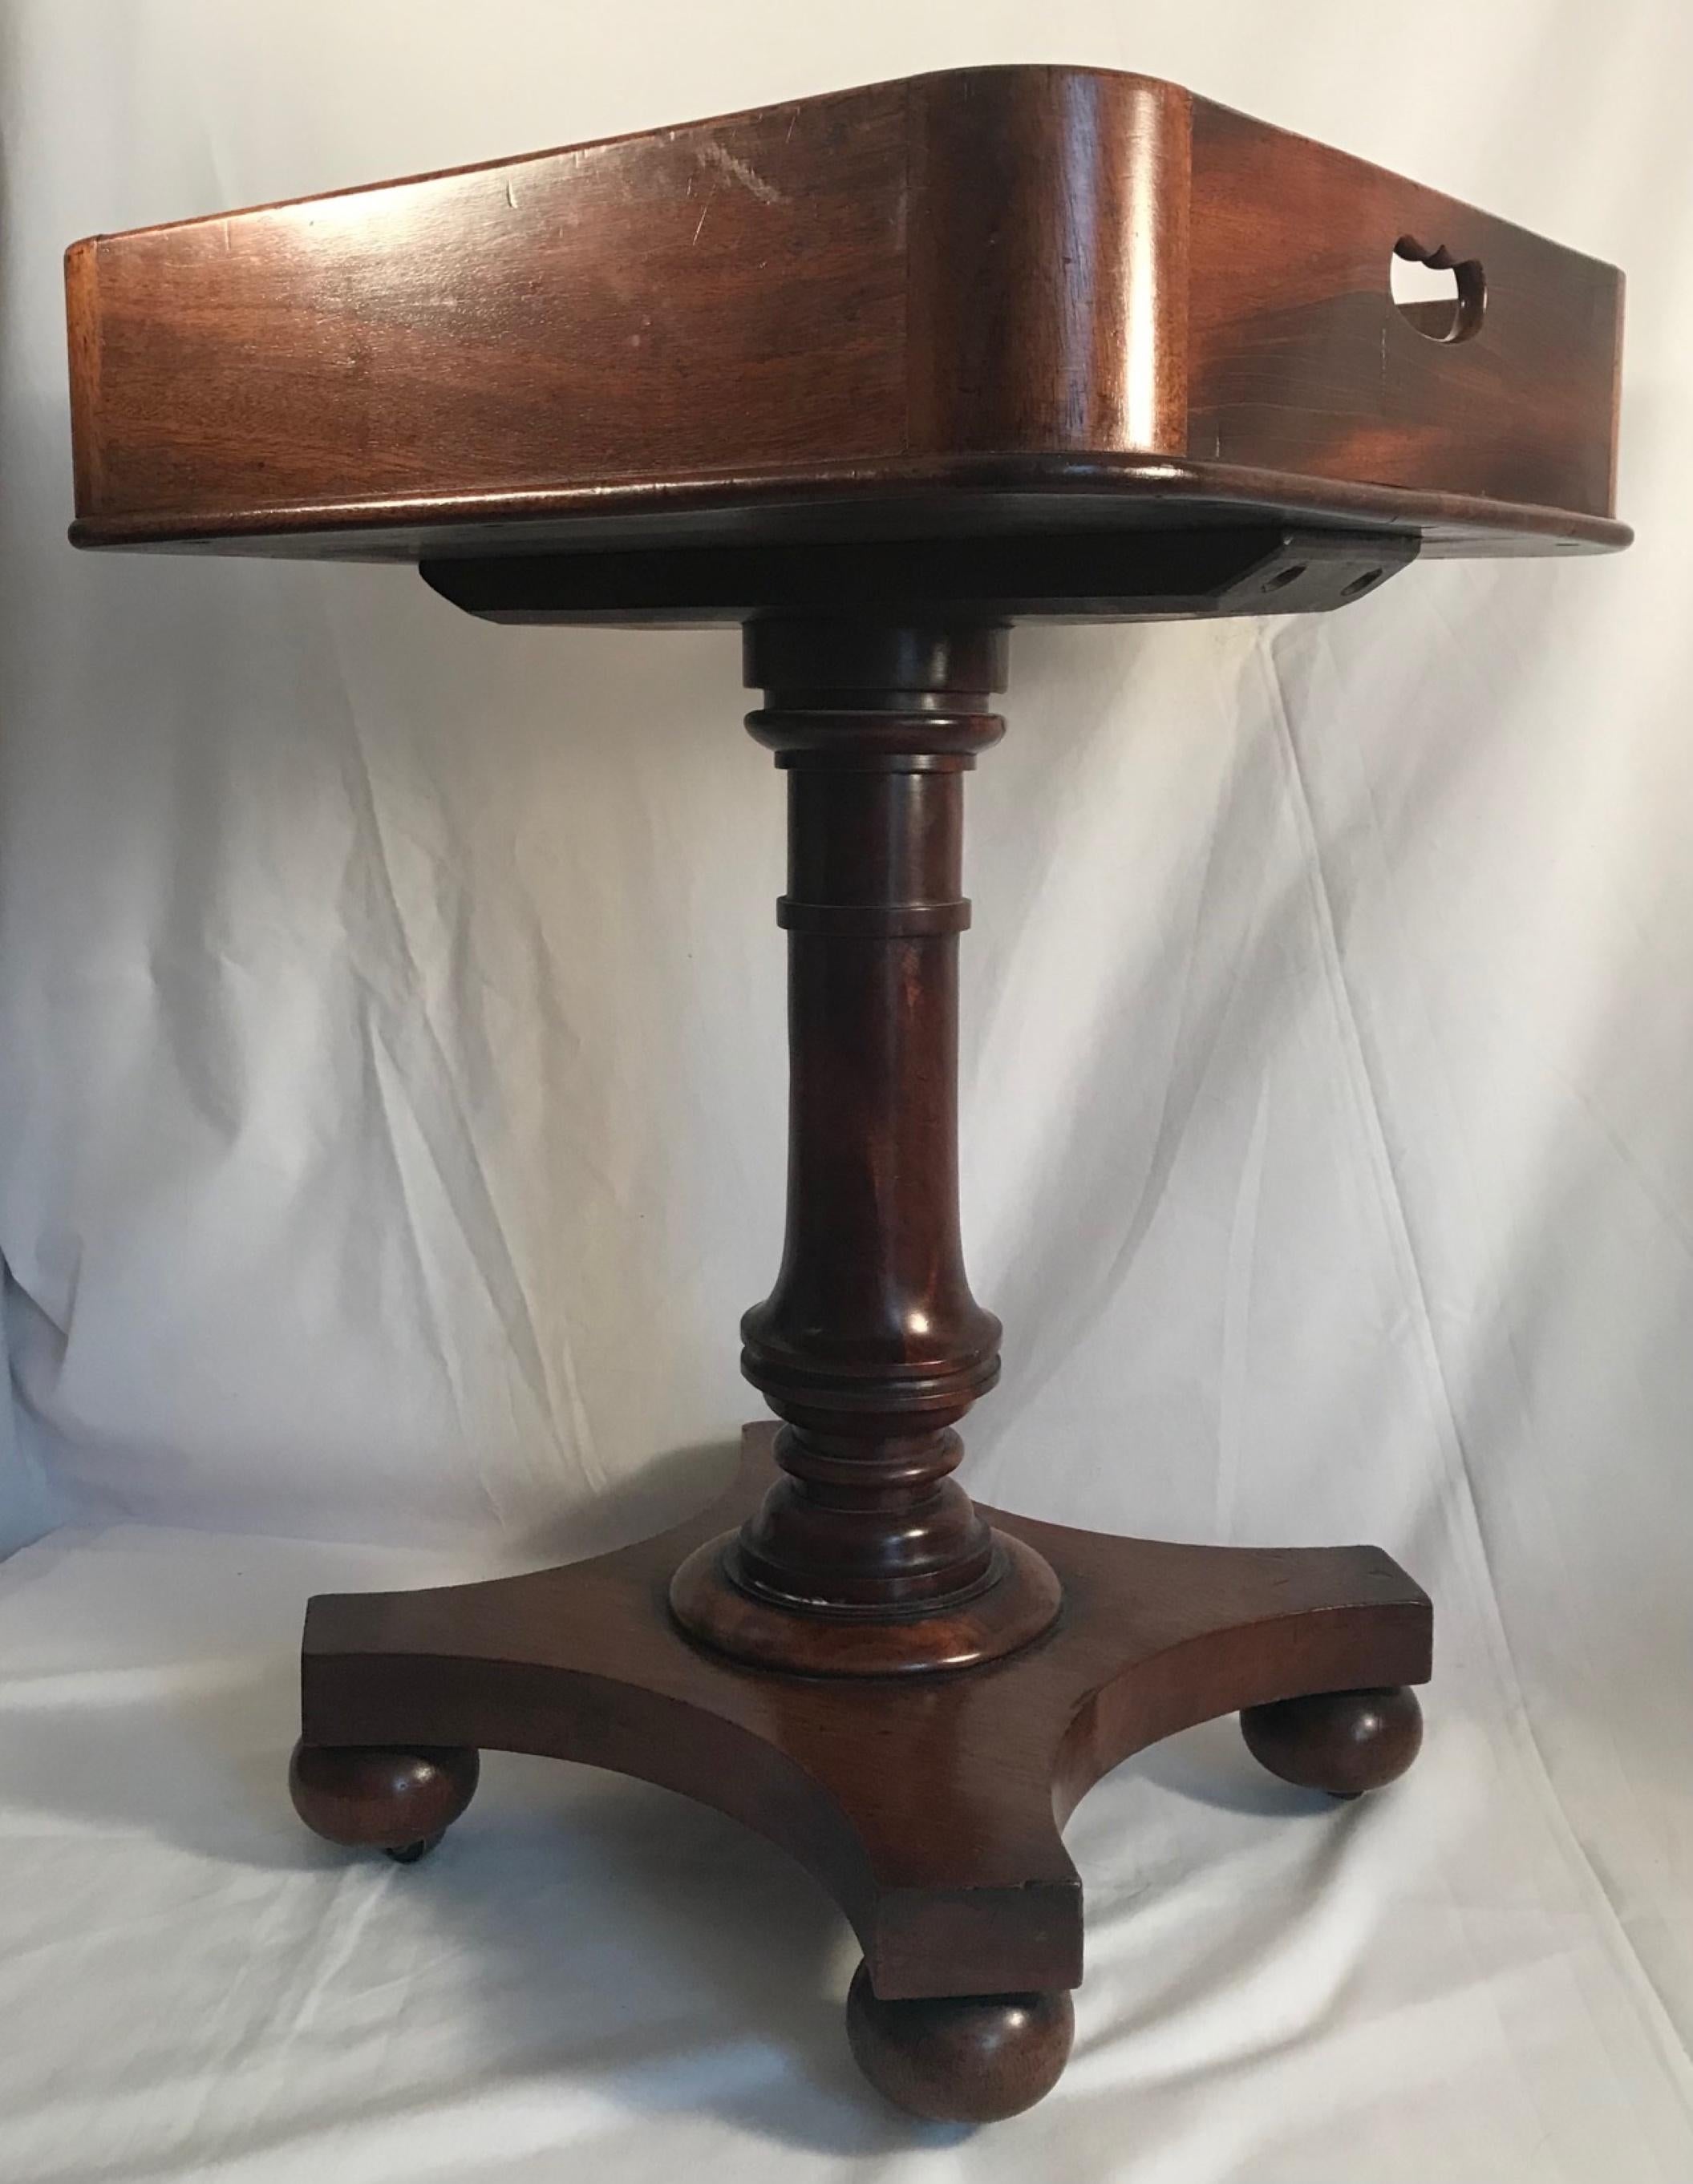 English Regency rosewood rolling butler tray top side table wine serving Stand

This very rare and superb quality English rosewood tray top side table stands or gently rolls on a quadraform base with bun feet and inset brass castors. The high